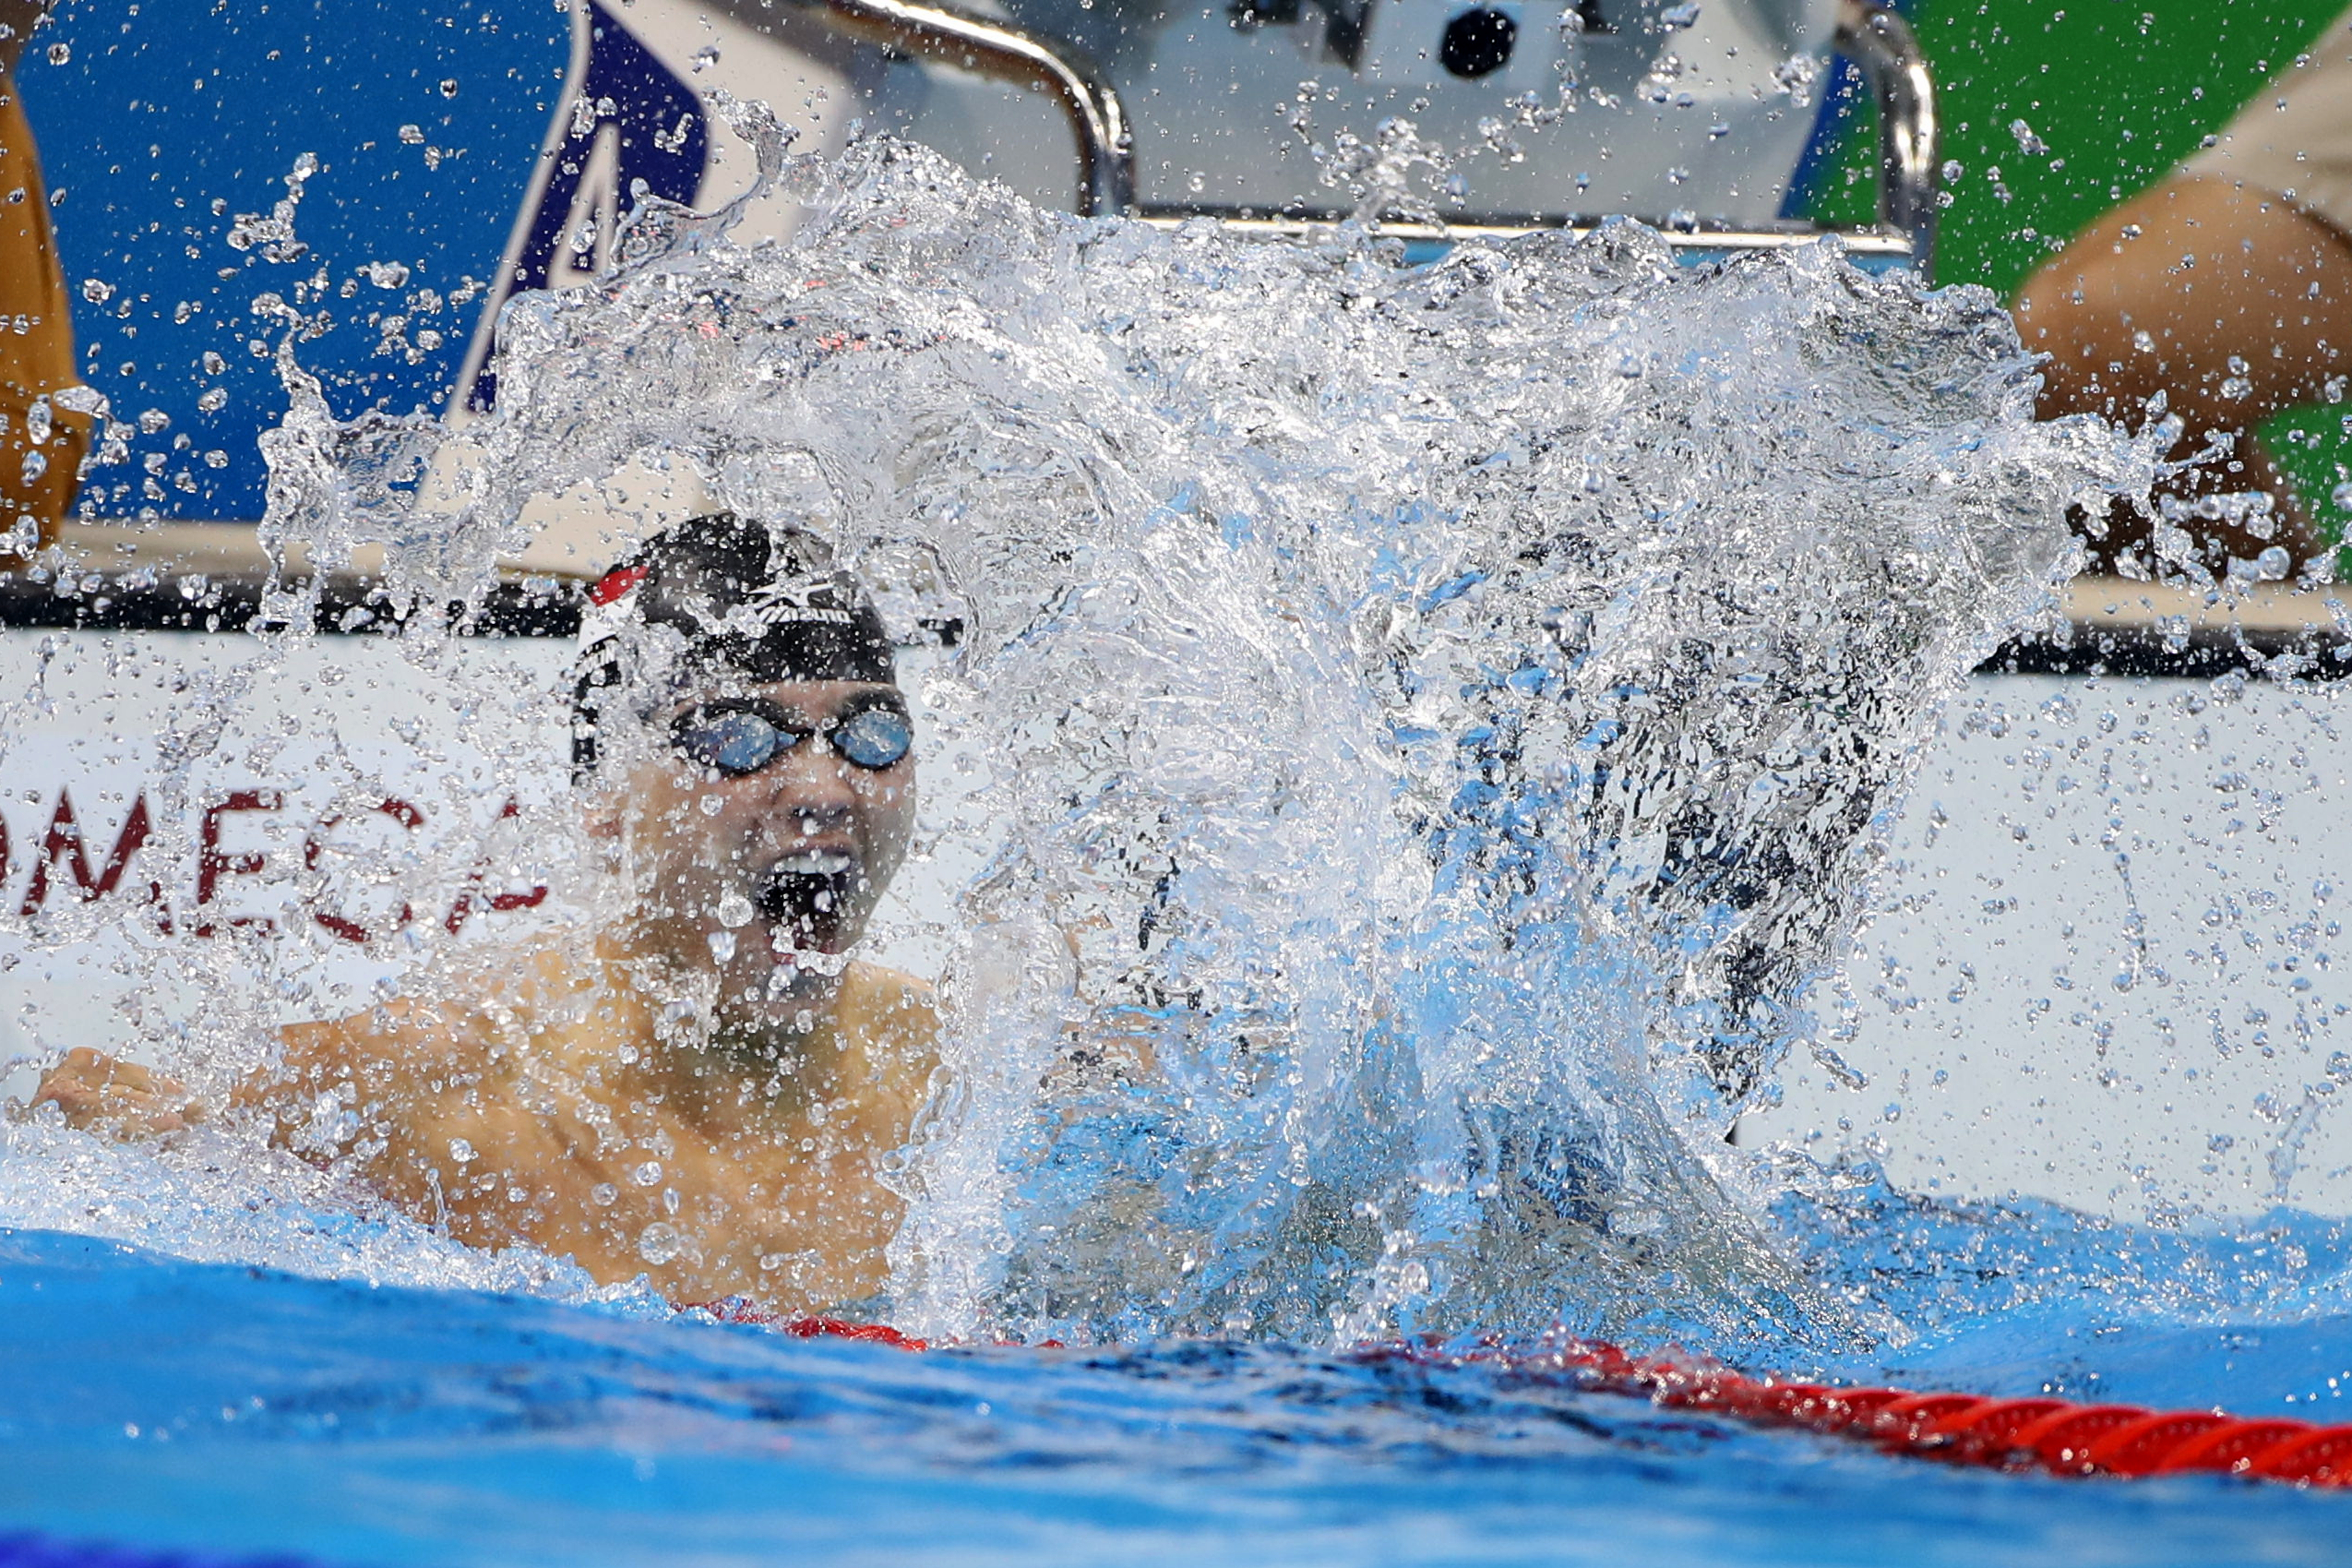 Swimming - Olympics: Day 7 Joseph Schooling of Singapore winning the Men's 100m Butterfly Final during the swimming competition at the Olympic Aquatics Stadium August 12, 2016 in Rio de Janeiro, Brazil. (Photo by Tim Clayton/Corbis via Getty Images)